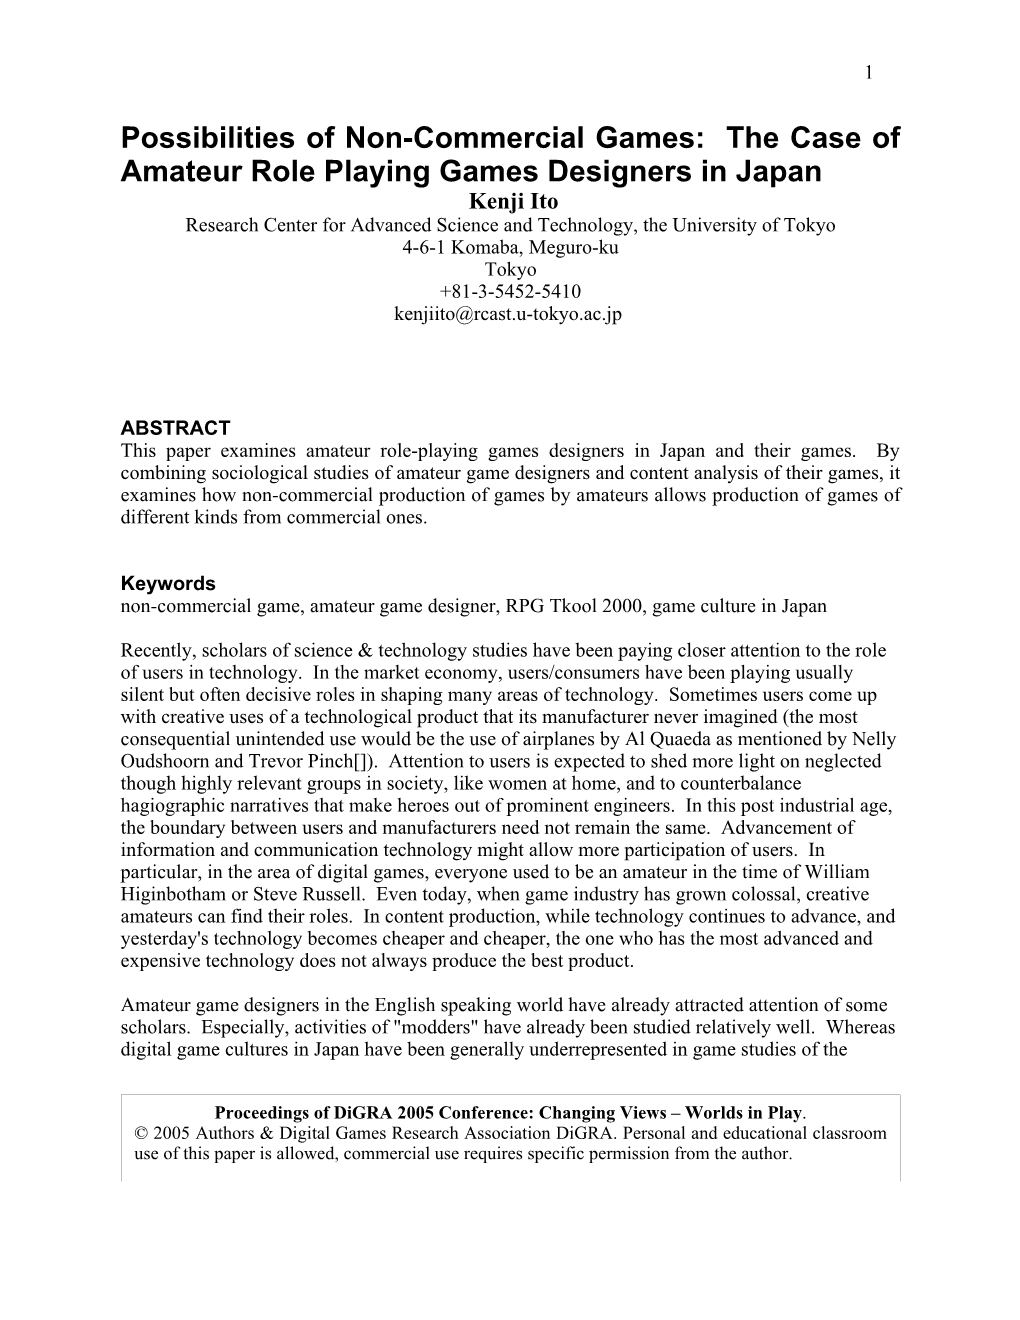 Possibilities of Non-Commercial Games: the Case of Amateur Role